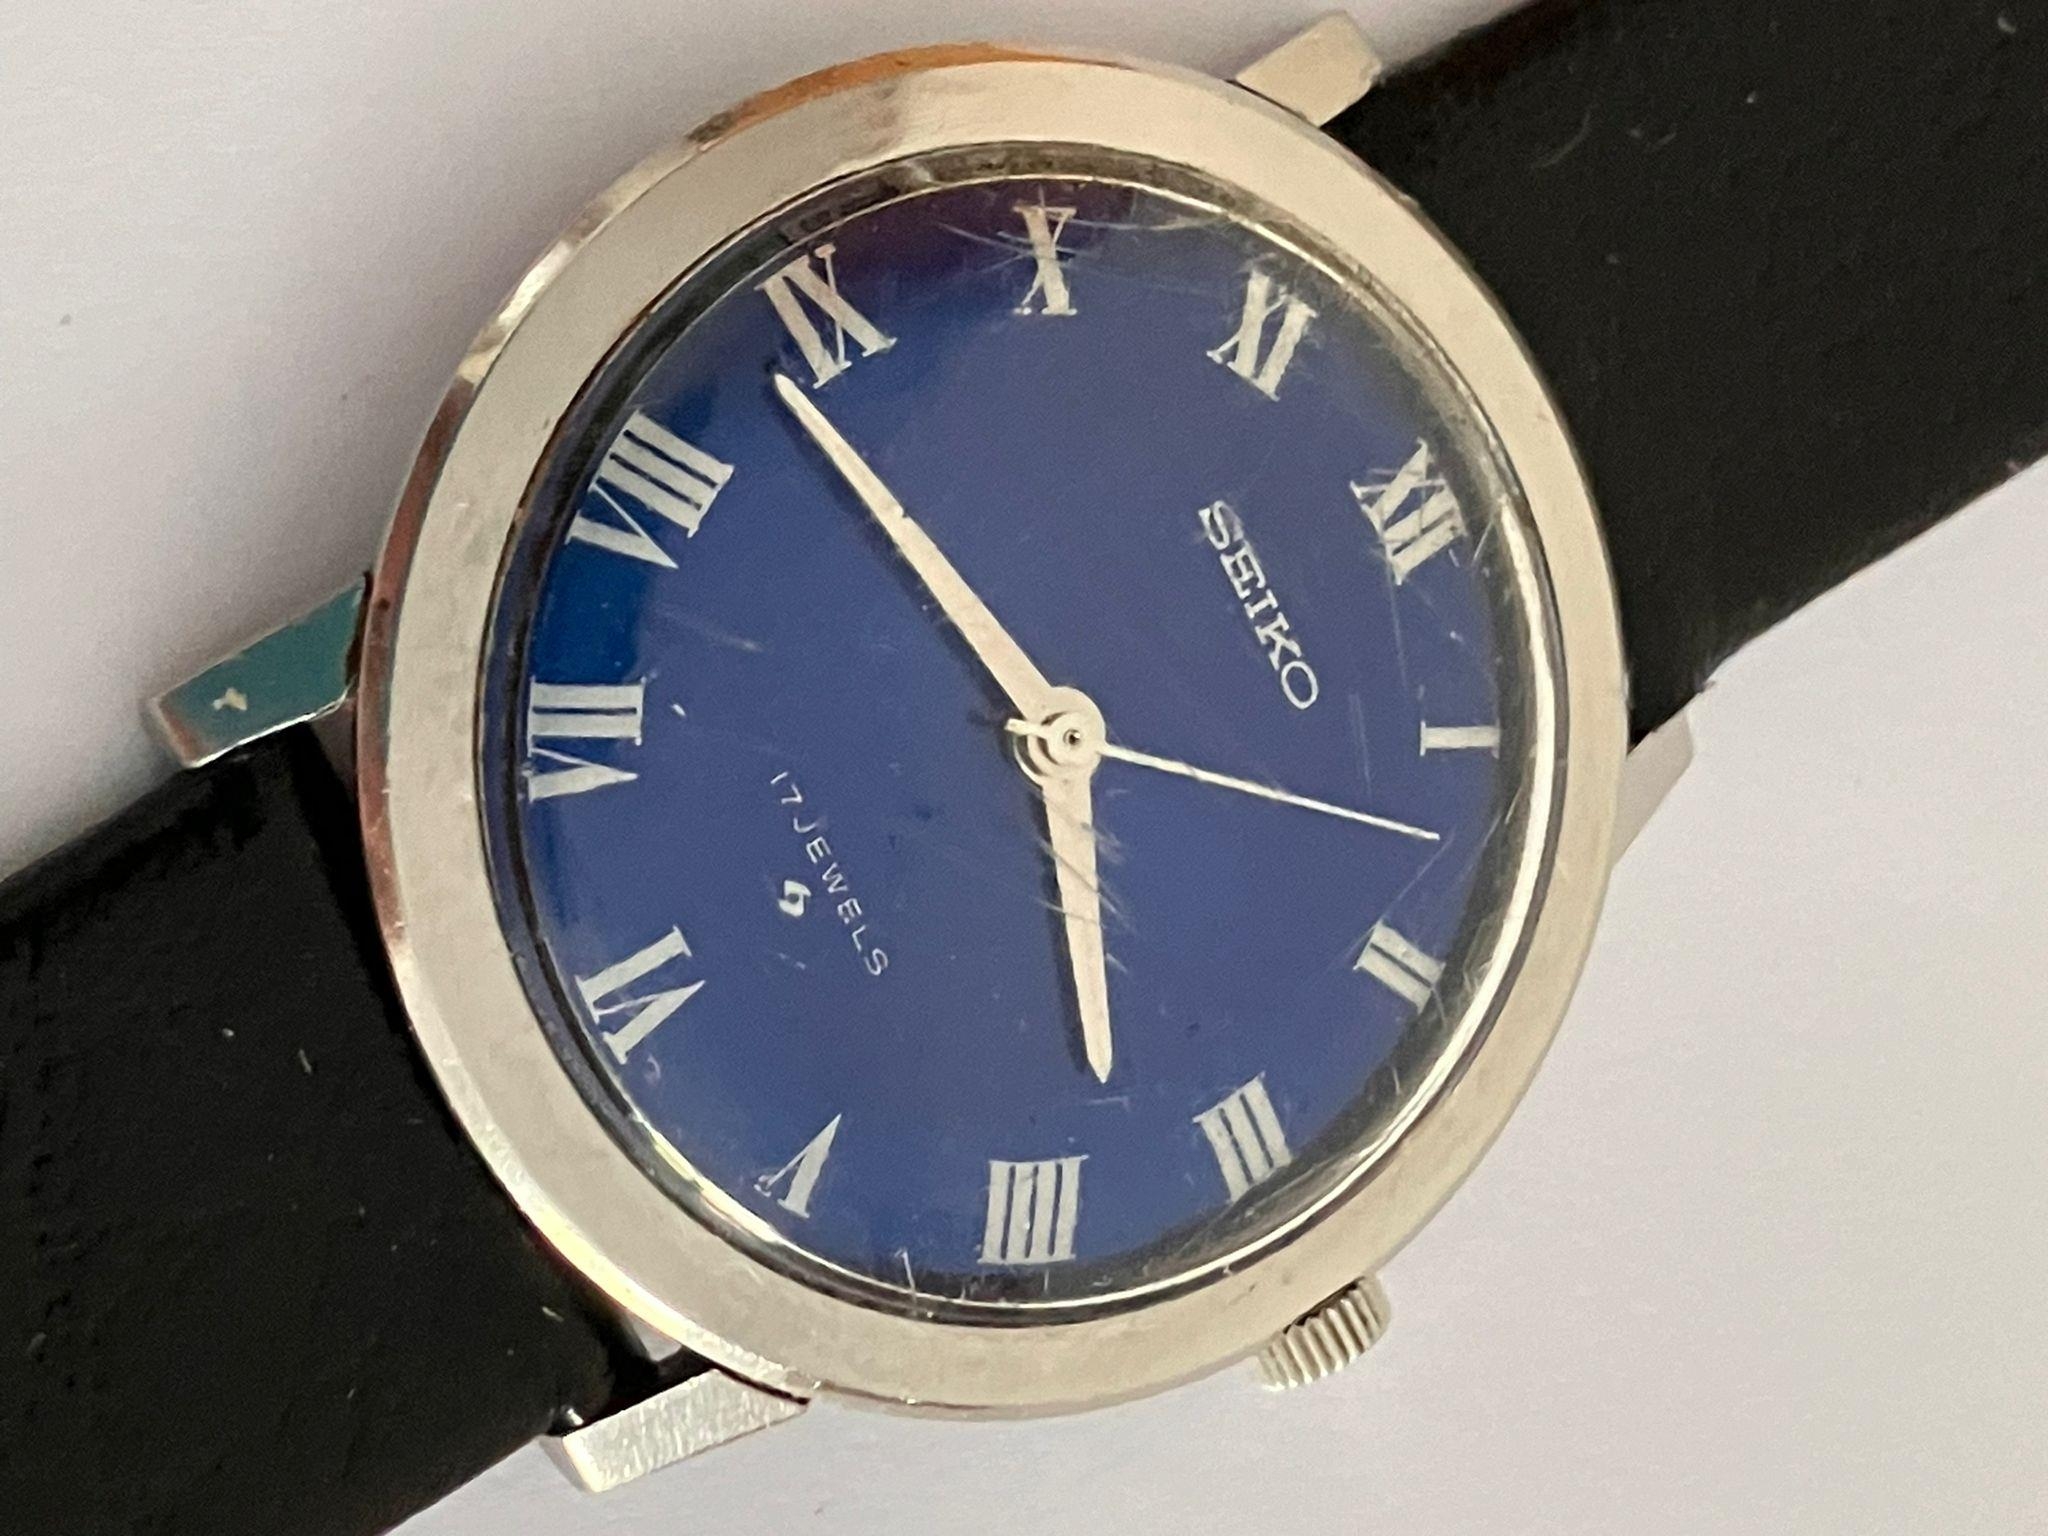 Gentlemans vintage SEIKO 66- 7090 wristwatch. Blue Face Model with Roman numerals. Manual winding in - Image 2 of 5